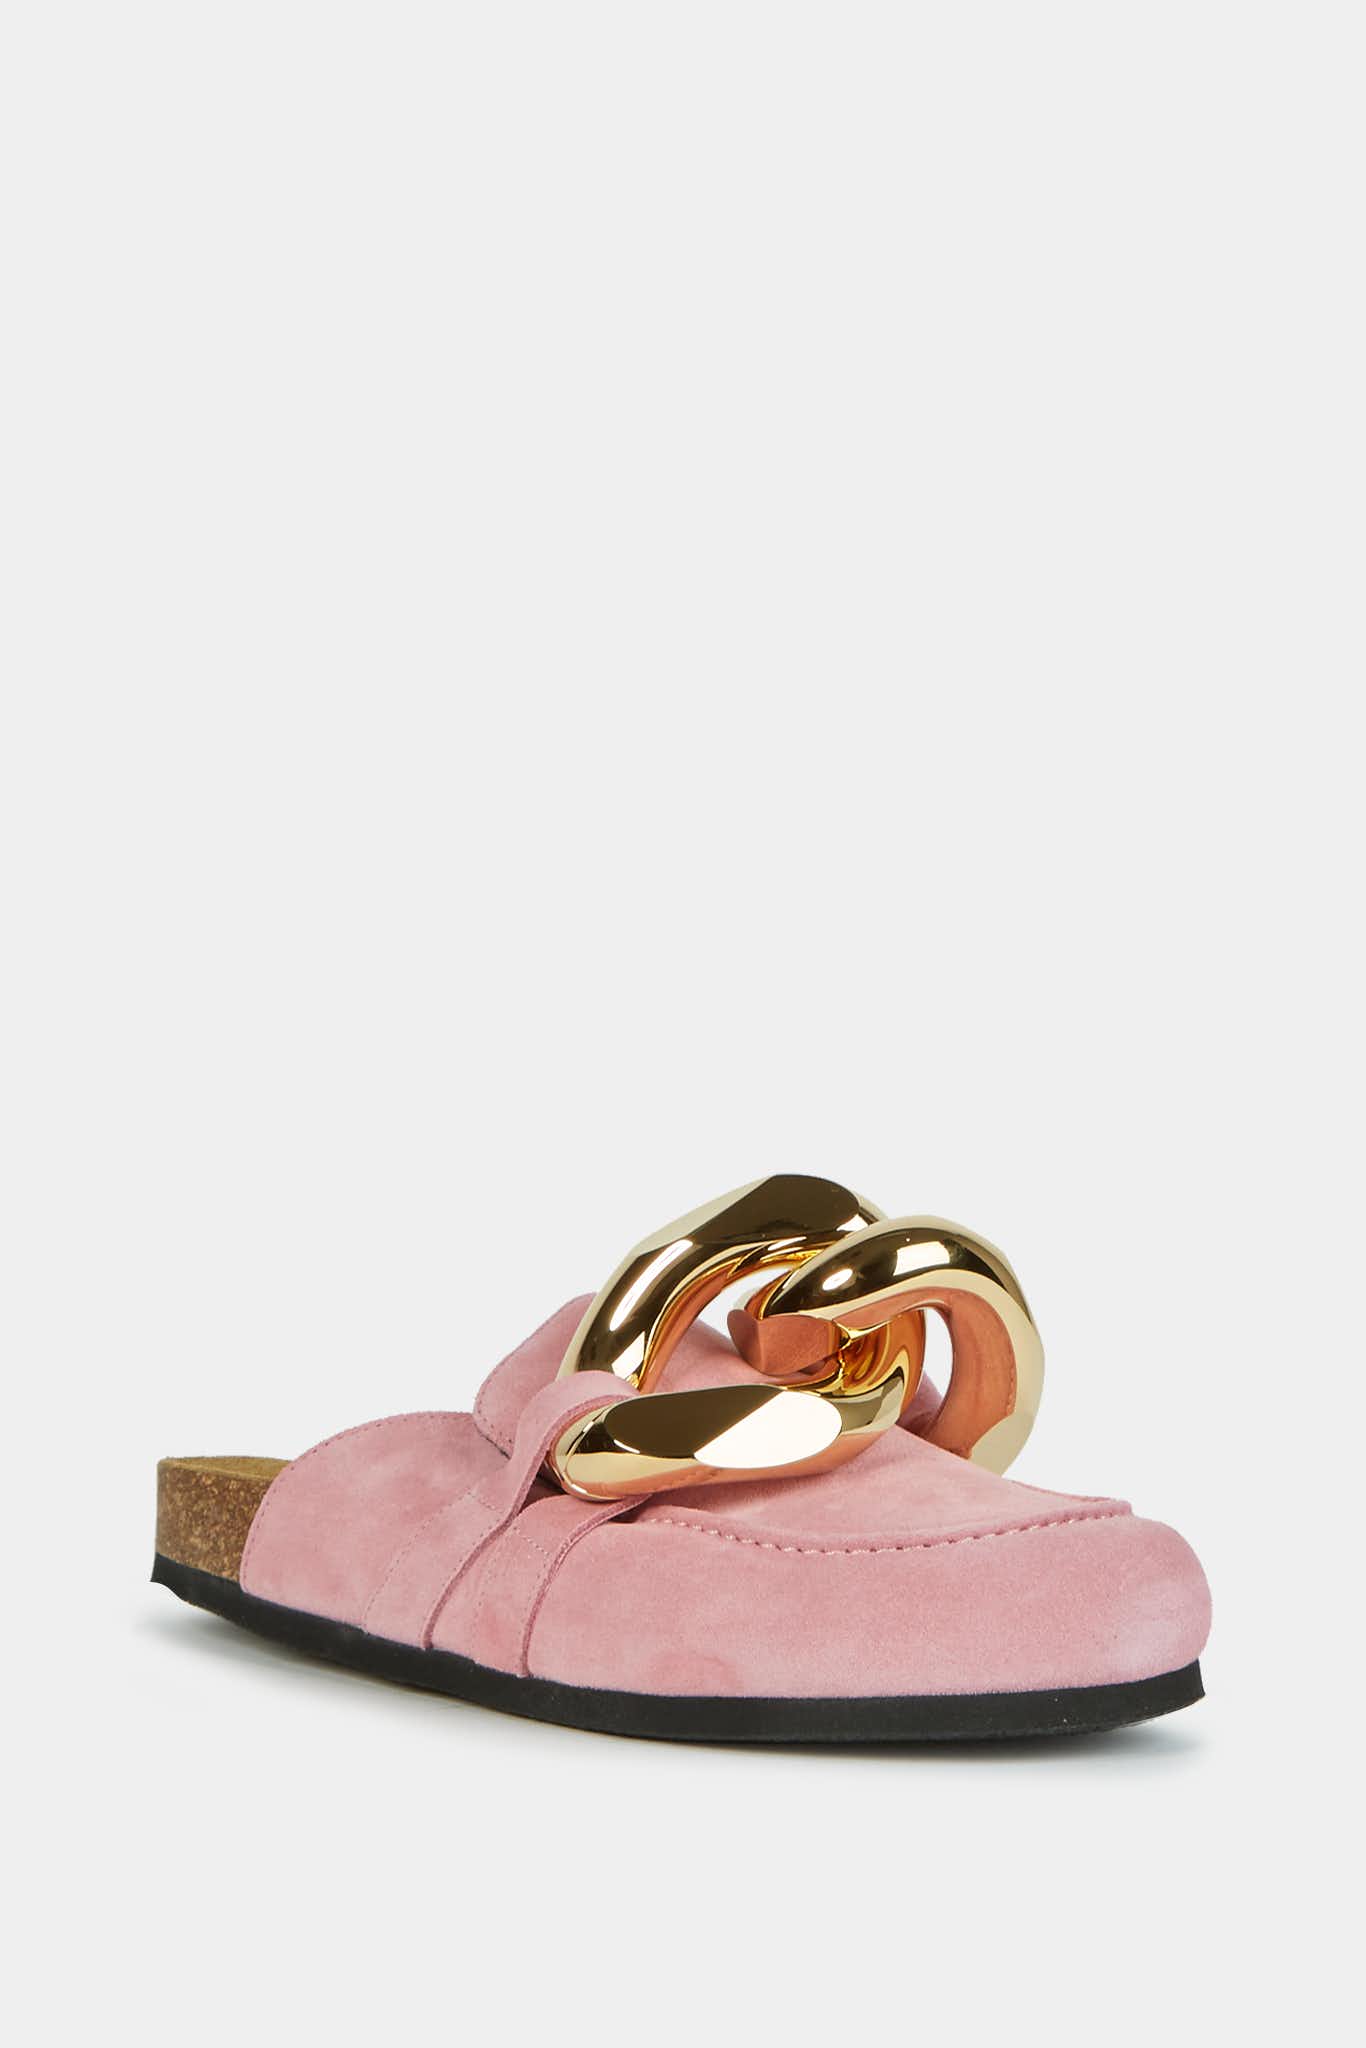 JW Anderson Pink Suede Loafer Mules